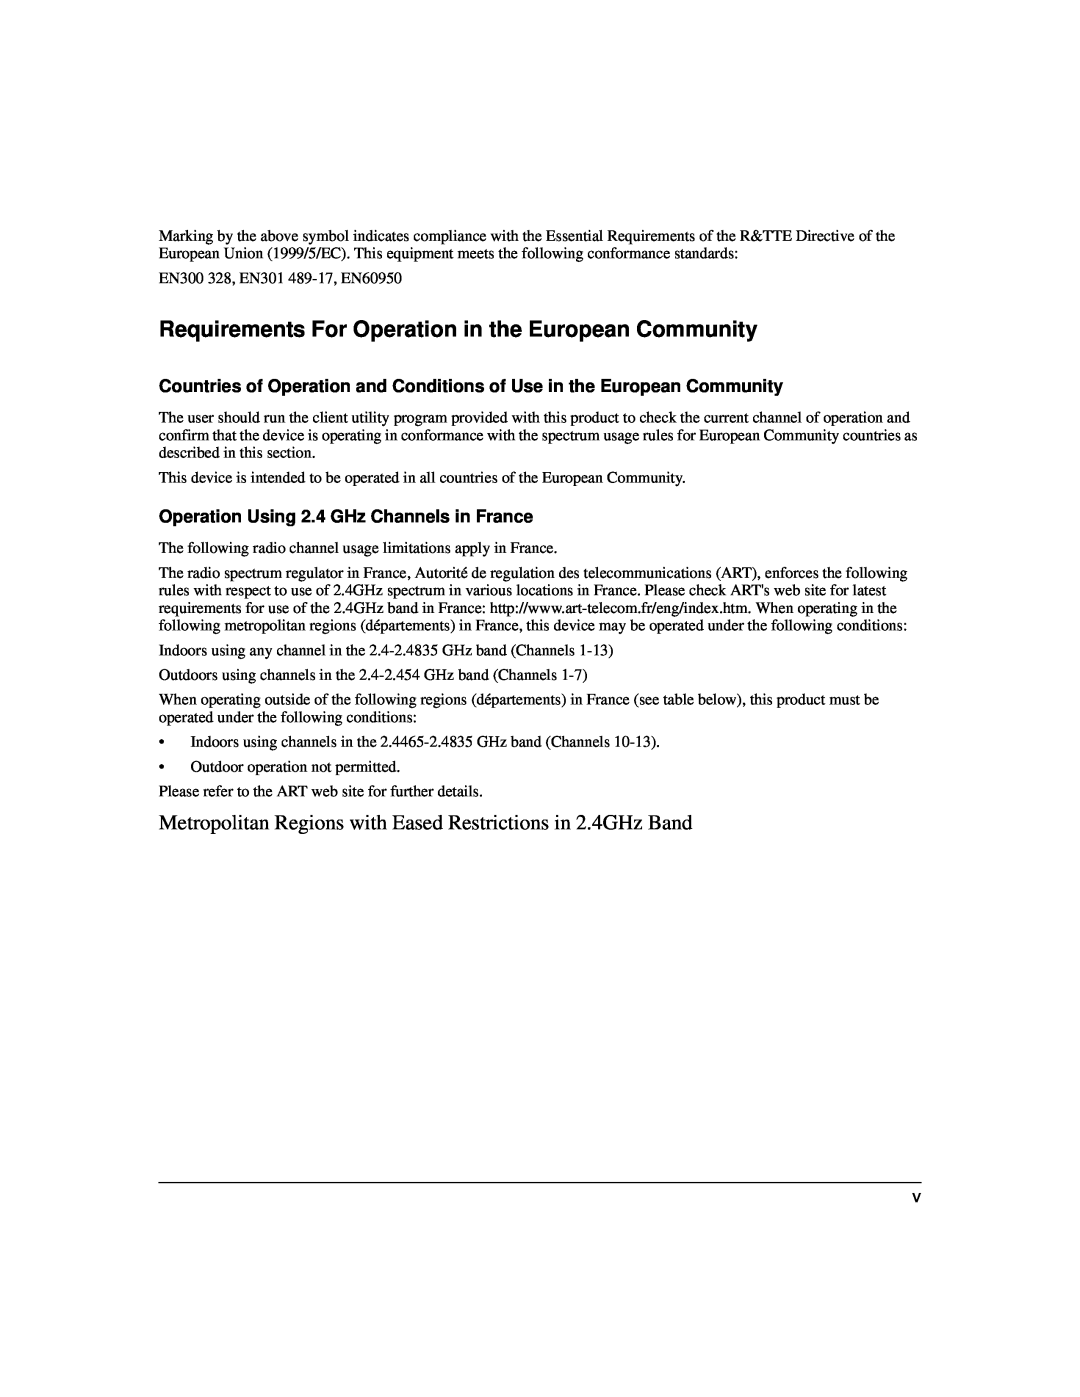 NETGEAR WG121 user manual Requirements For Operation in the European Community, Operation Using 2.4 GHz Channels in France 